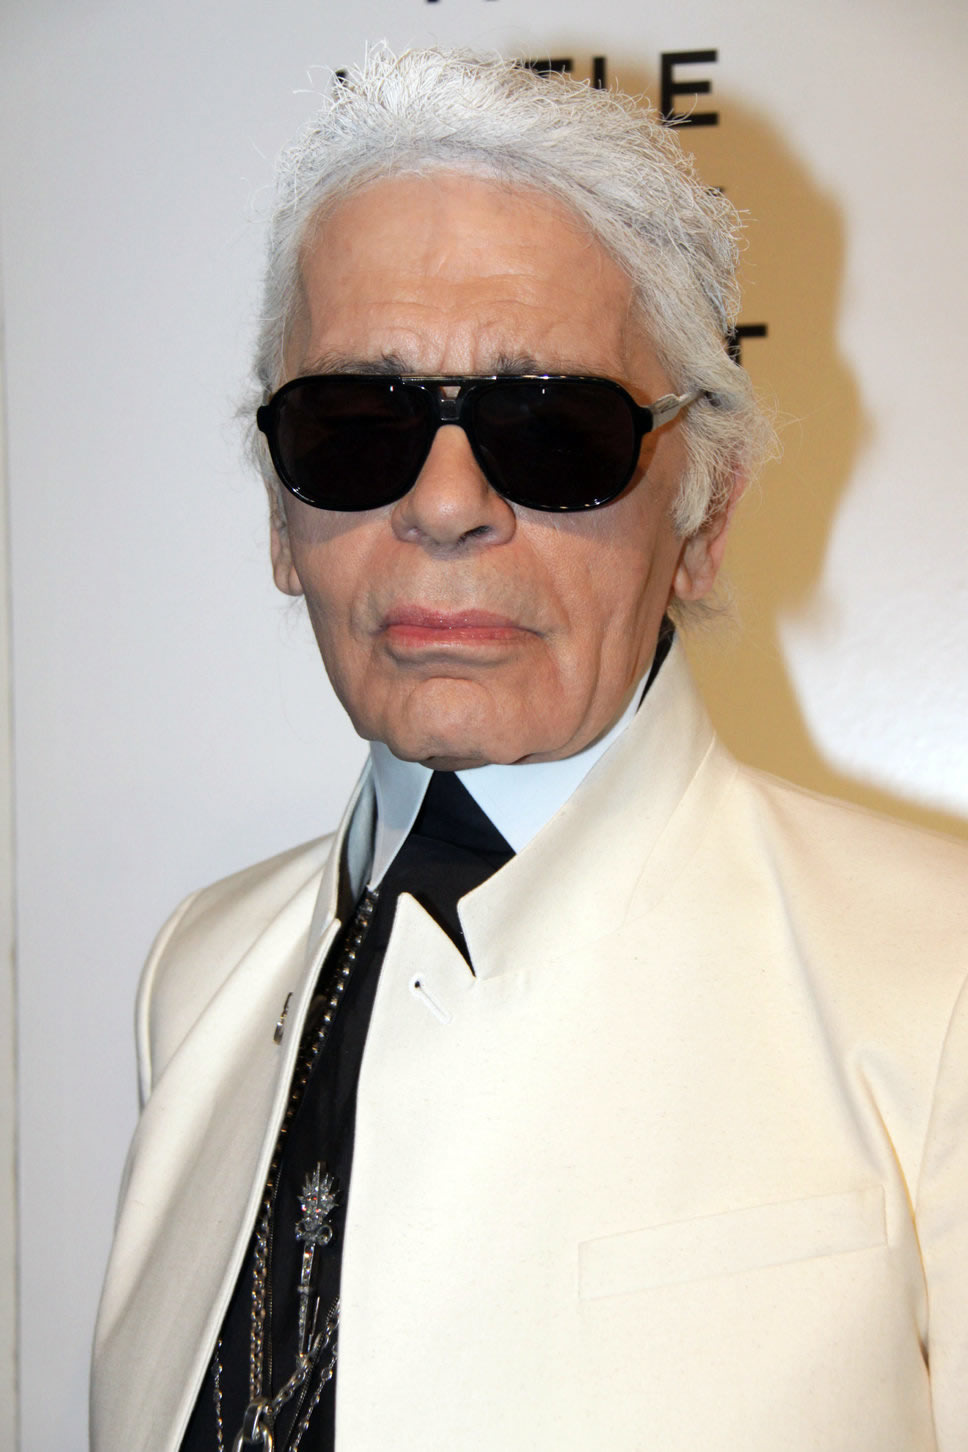 Karl Lagerfeld Fat Quotes. QuotesGram